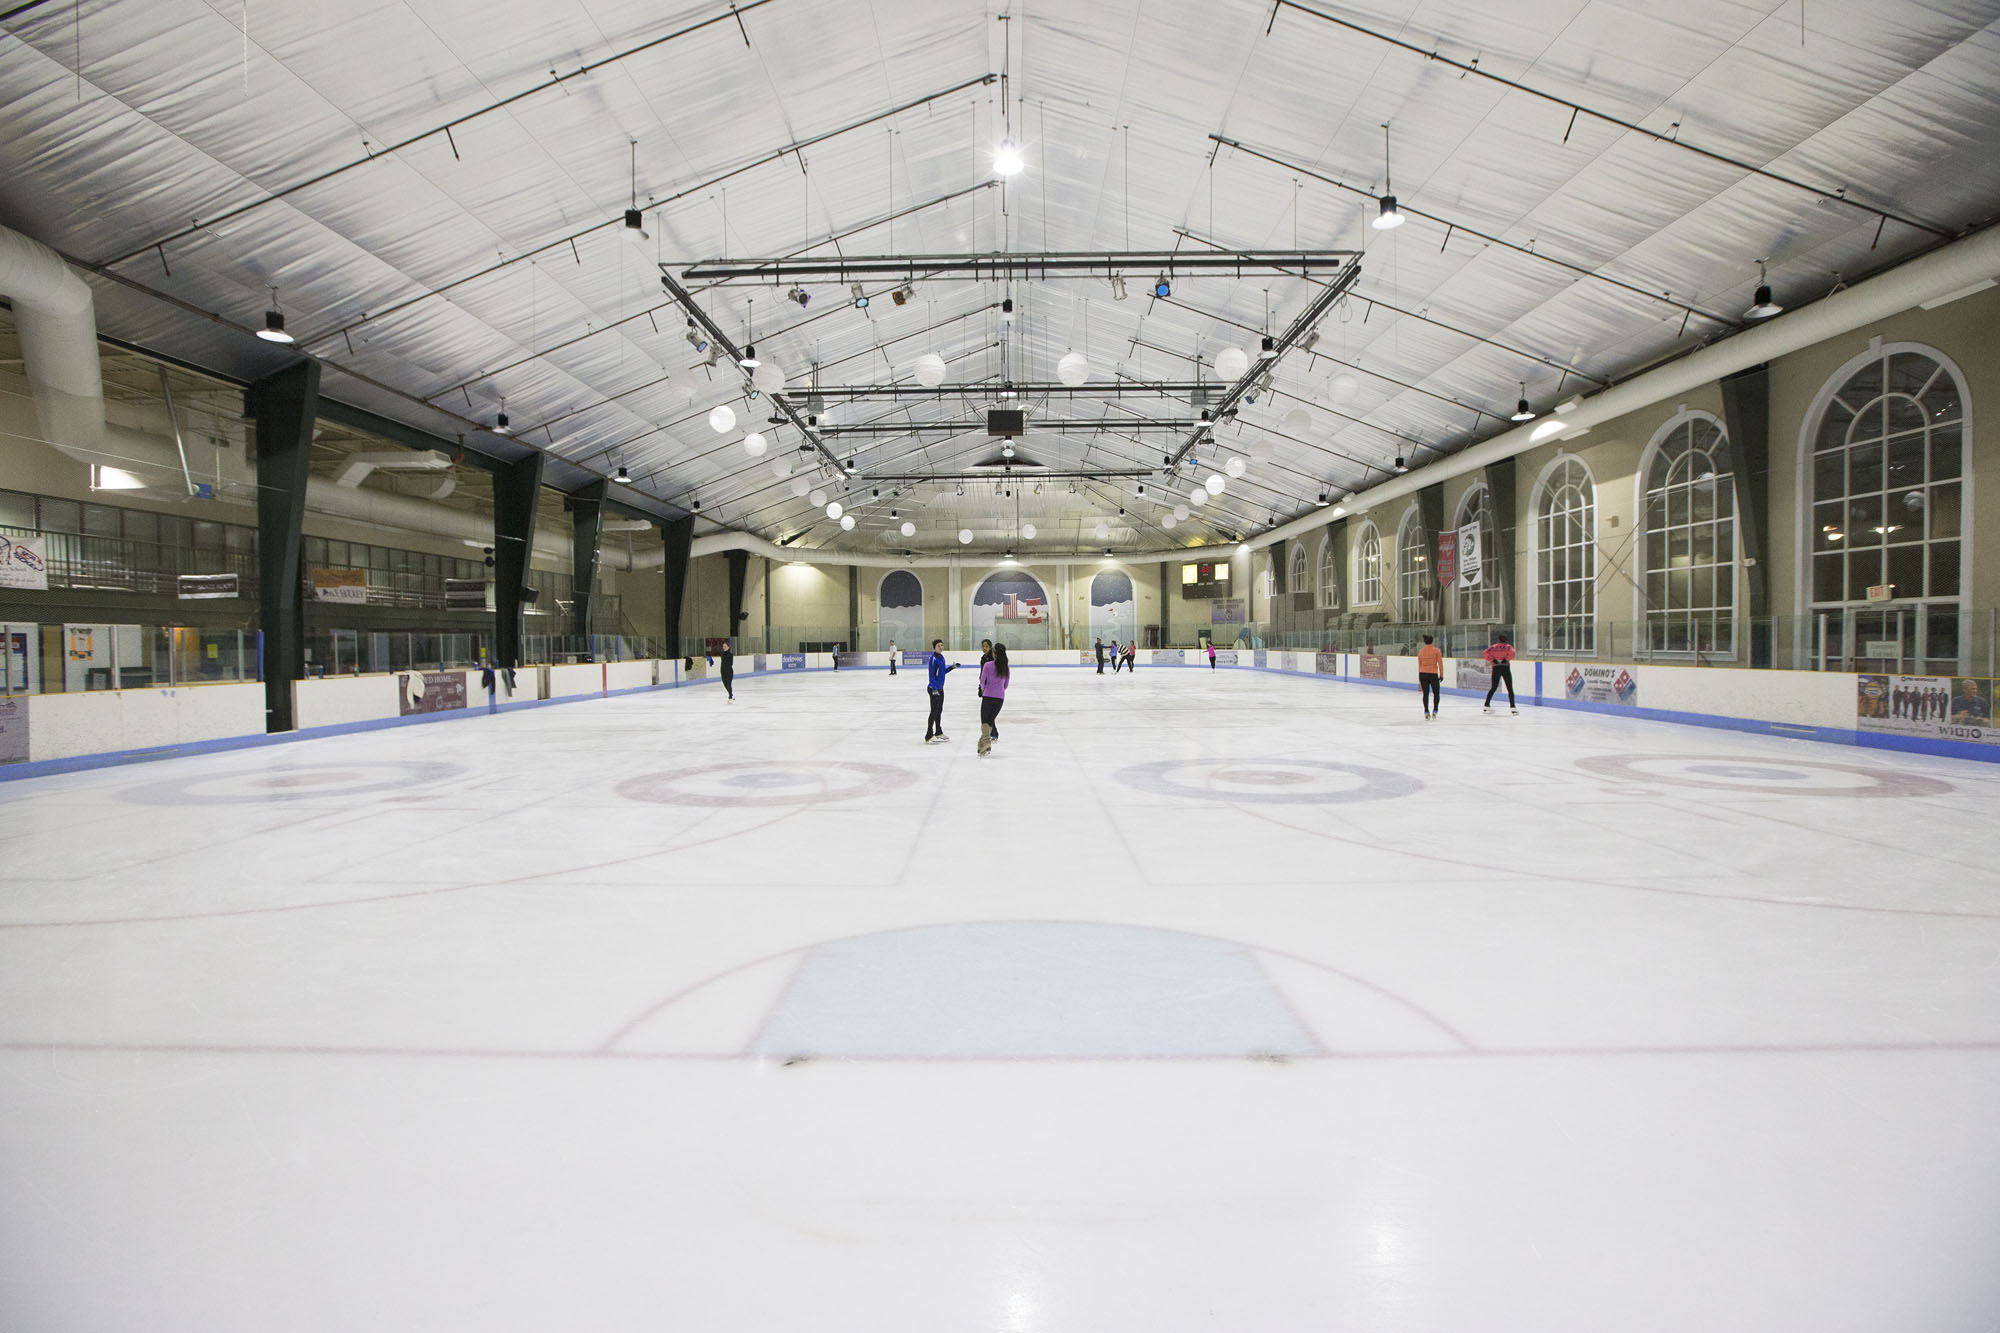 After competing in ice rinks across the United States and Canada, Christopher Ali and Lindsay Slater now call Charlottesville’s Main Street Arena home.